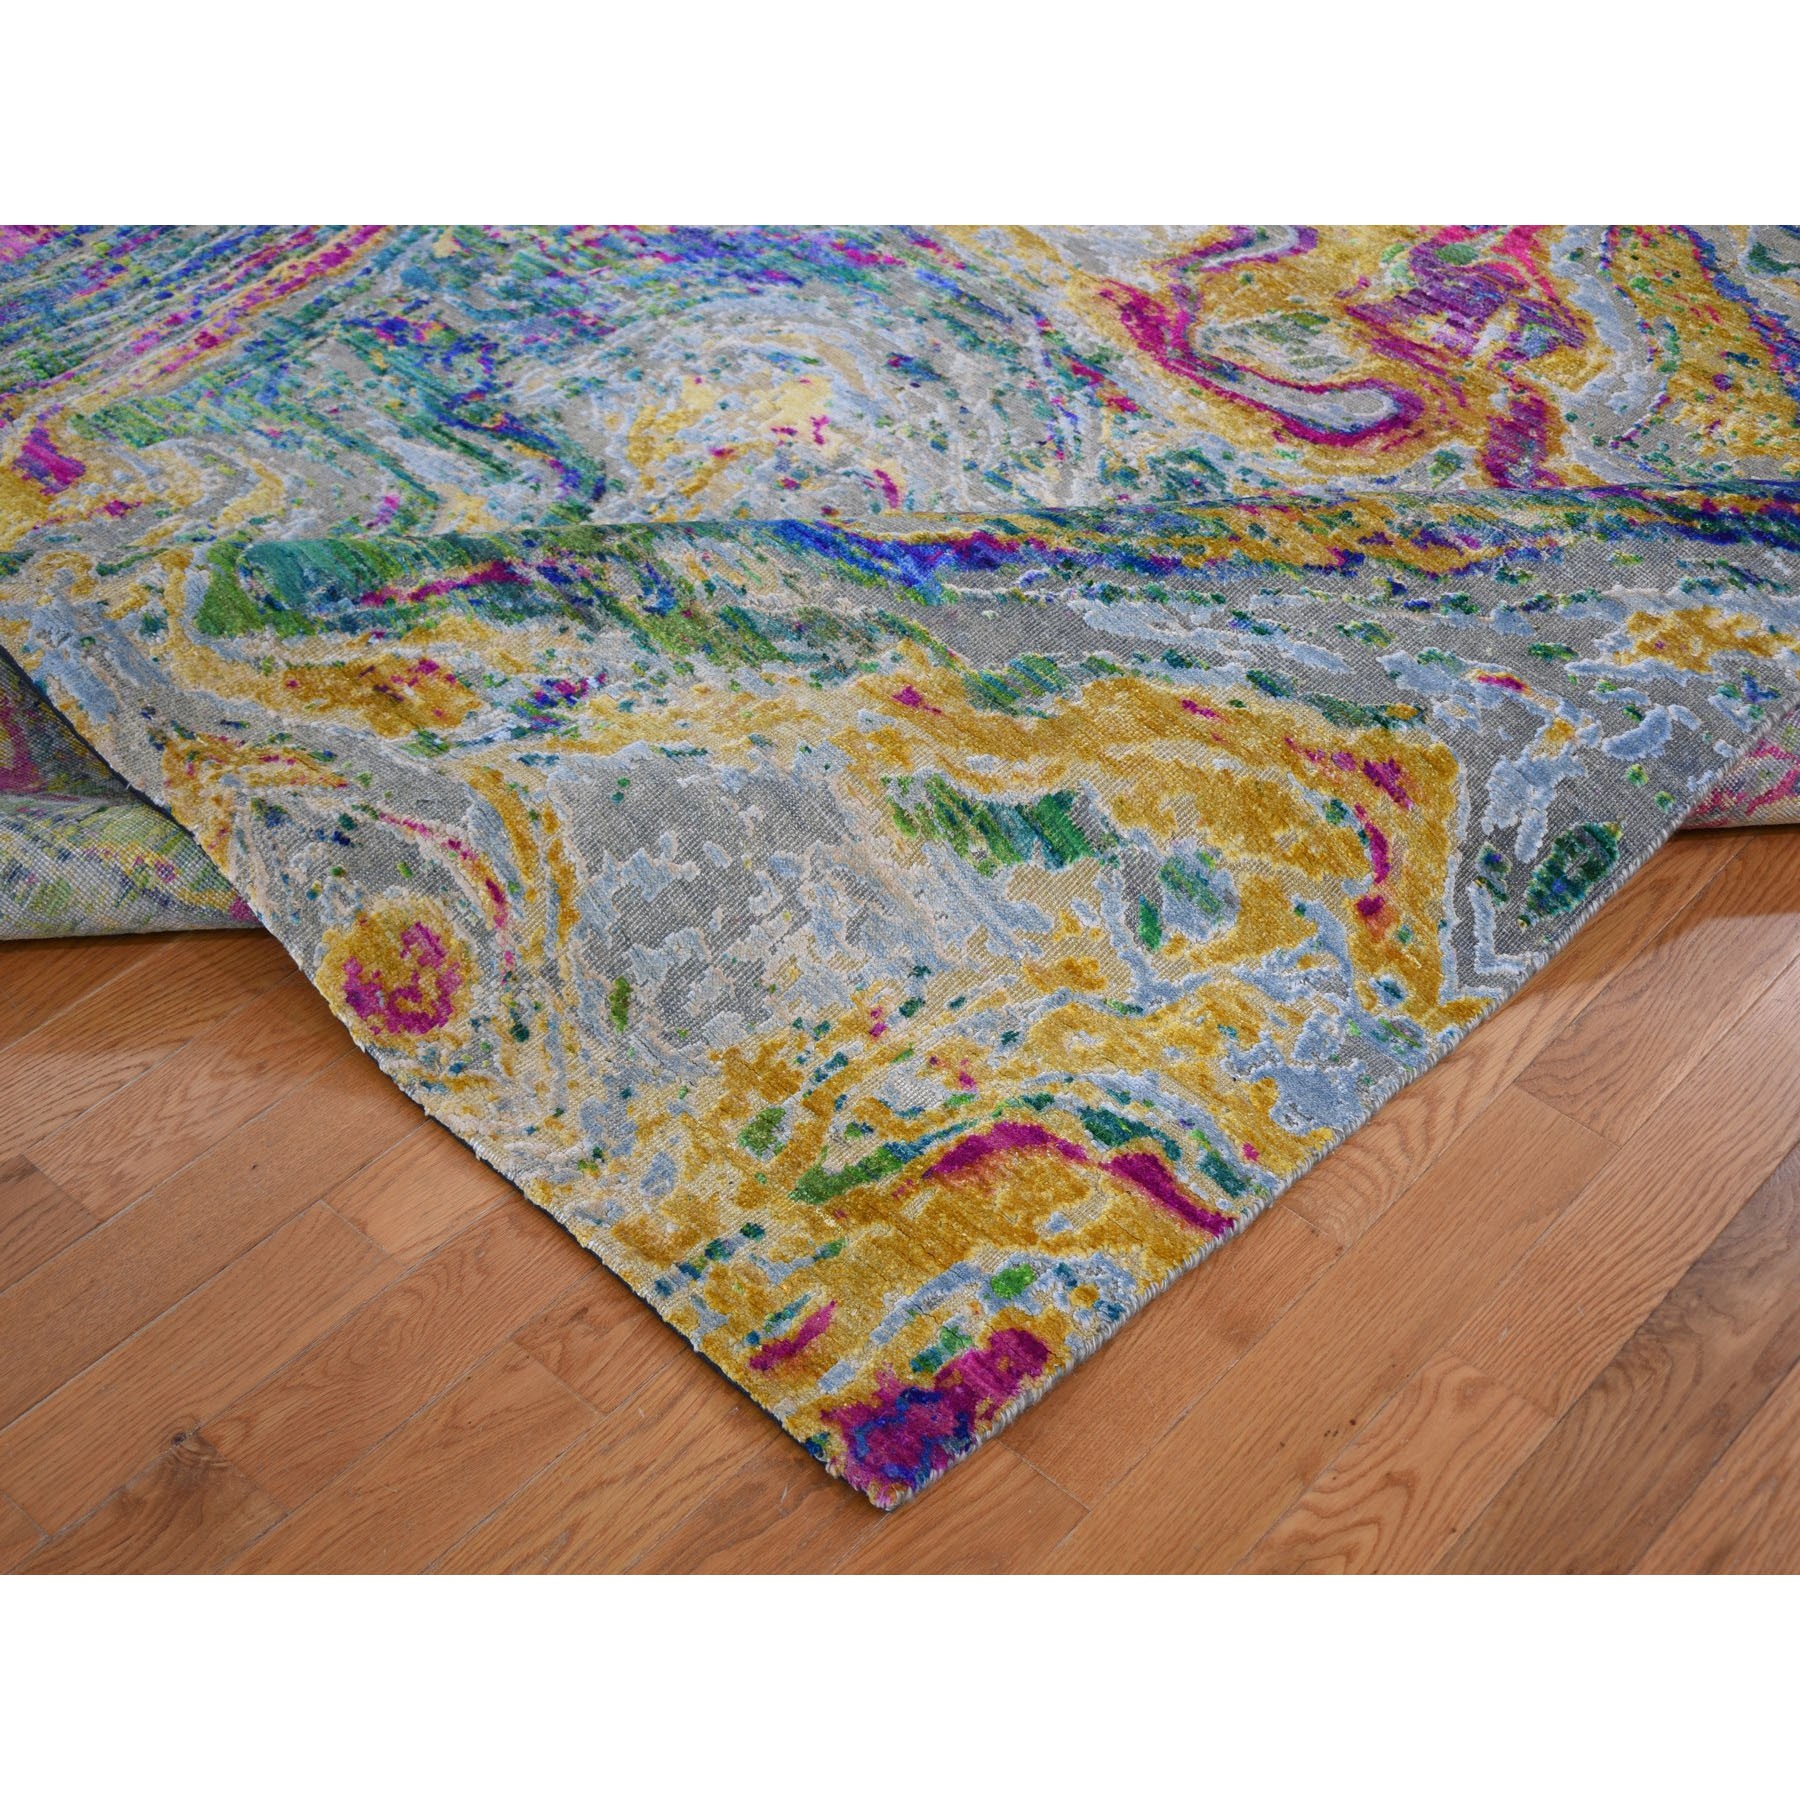 8'7"x11'6" THE LAVA, Colorful Sari Silk With Textured Wool Hand Woven Oriental Rug 